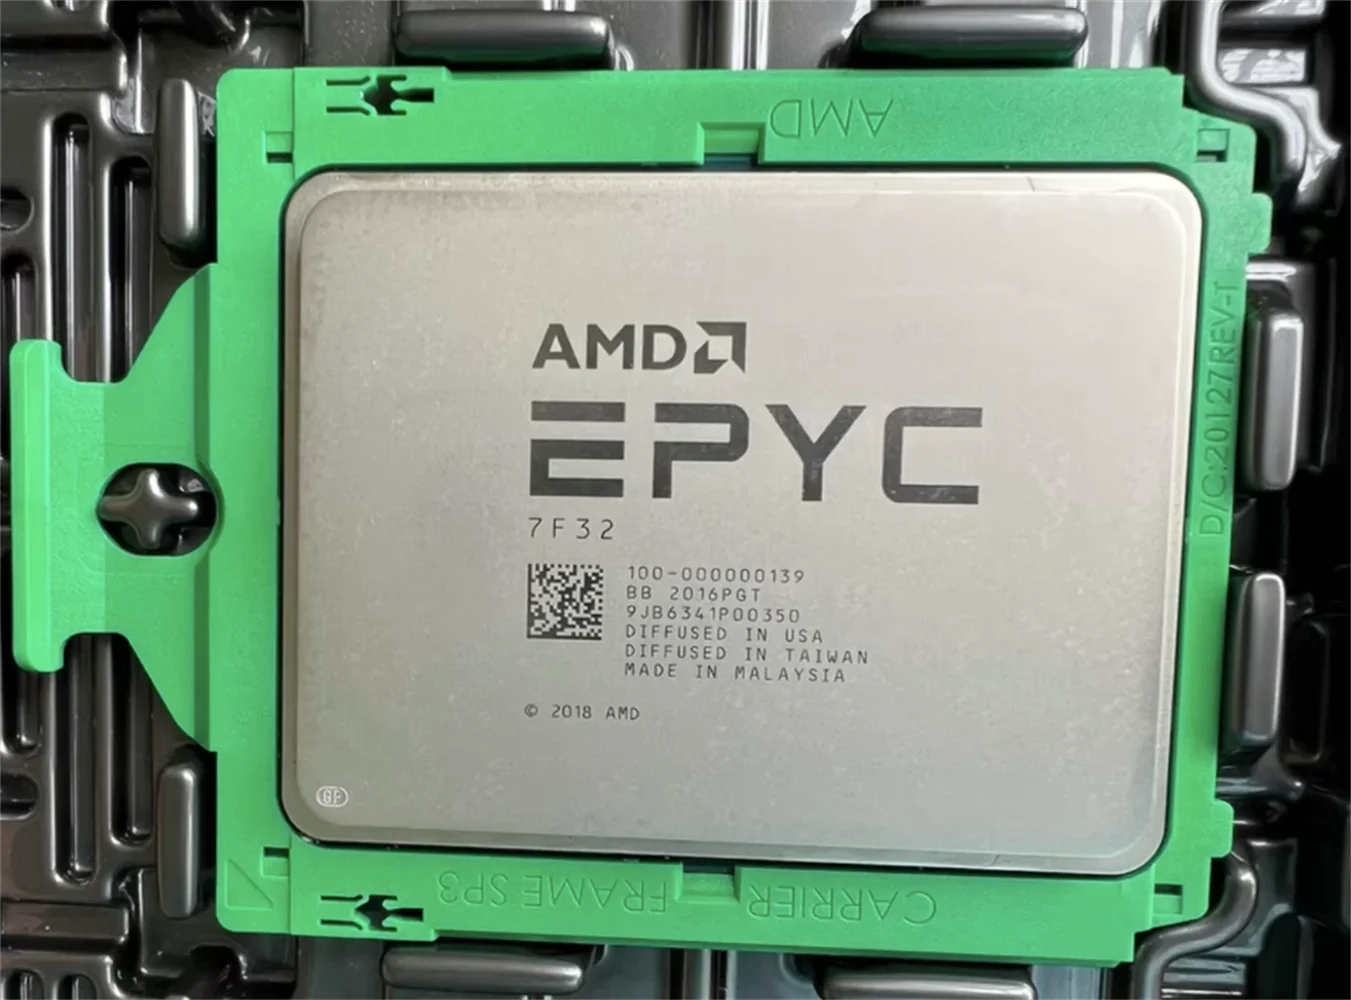 

AMD EPYC 7F32 3.7Ghz 8 Core/16 Thread L3 Cache 128MB TDP 180W SP3 Up to 3.9GHz 7002 Series Server CPU